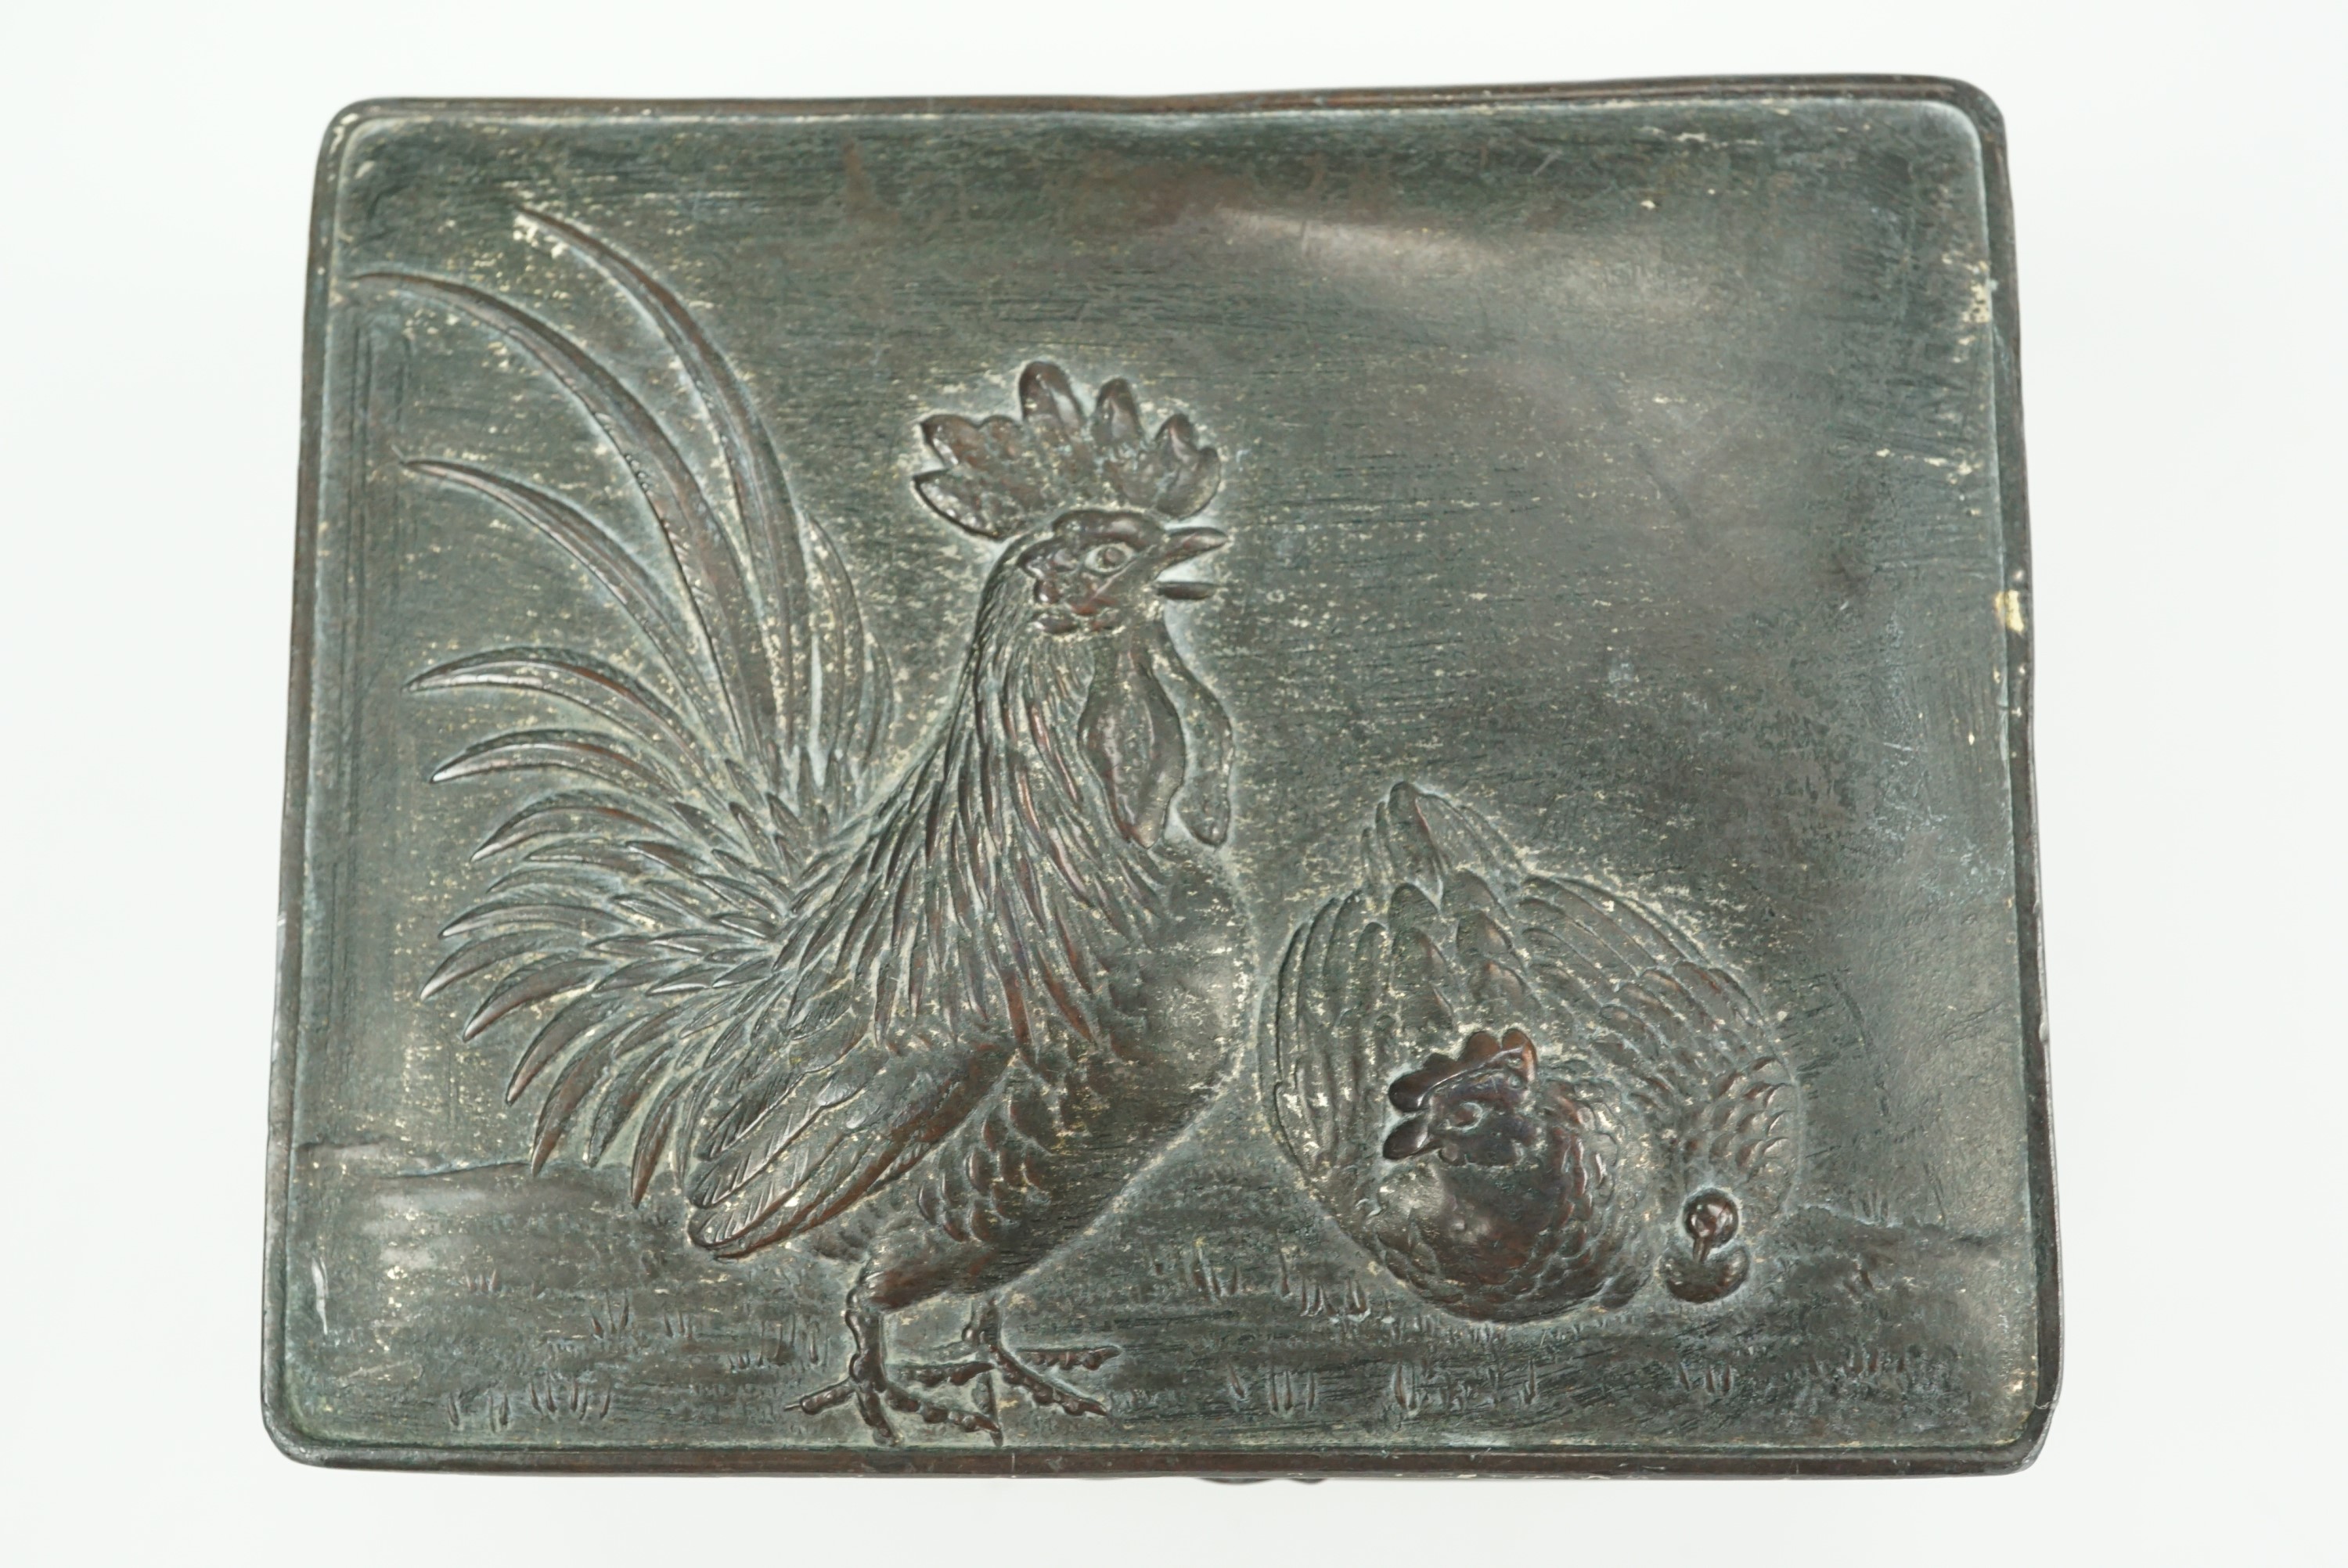 A small early 20th Century Japanese EPBM trinket box, its lid relief decorated in depiction of a